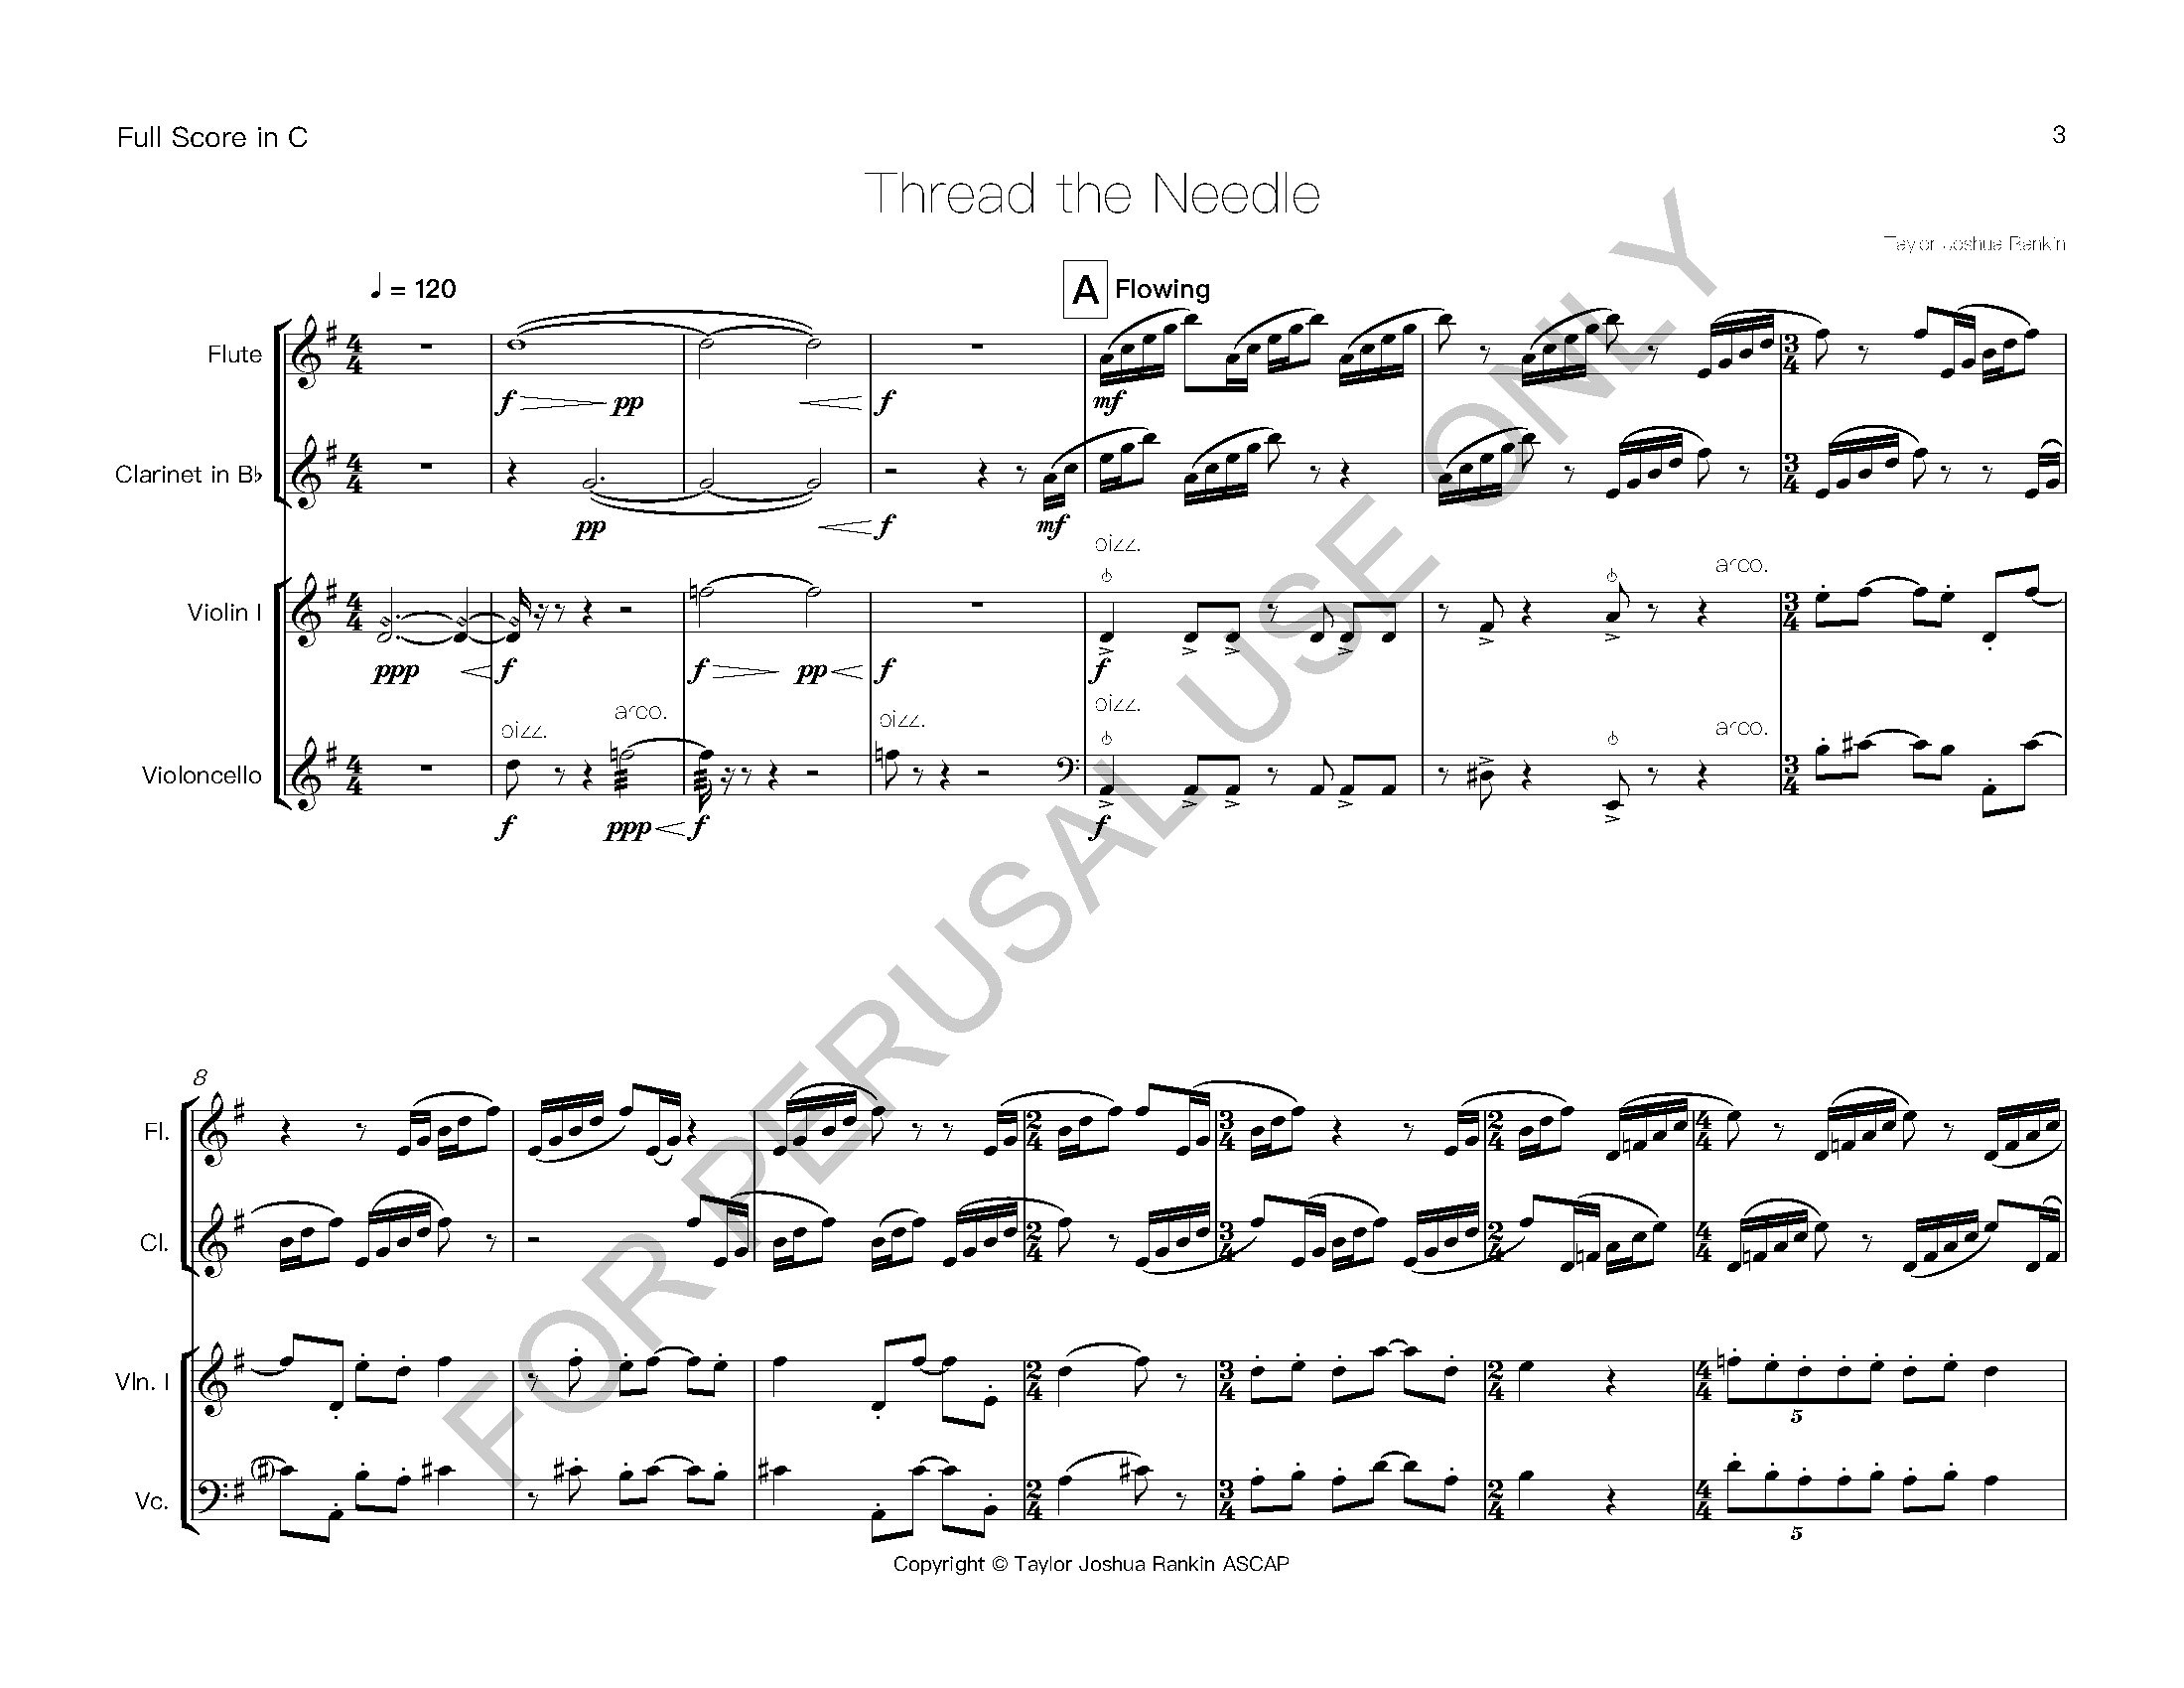 Thread the Needle - Full Score in C_Page_03.jpg